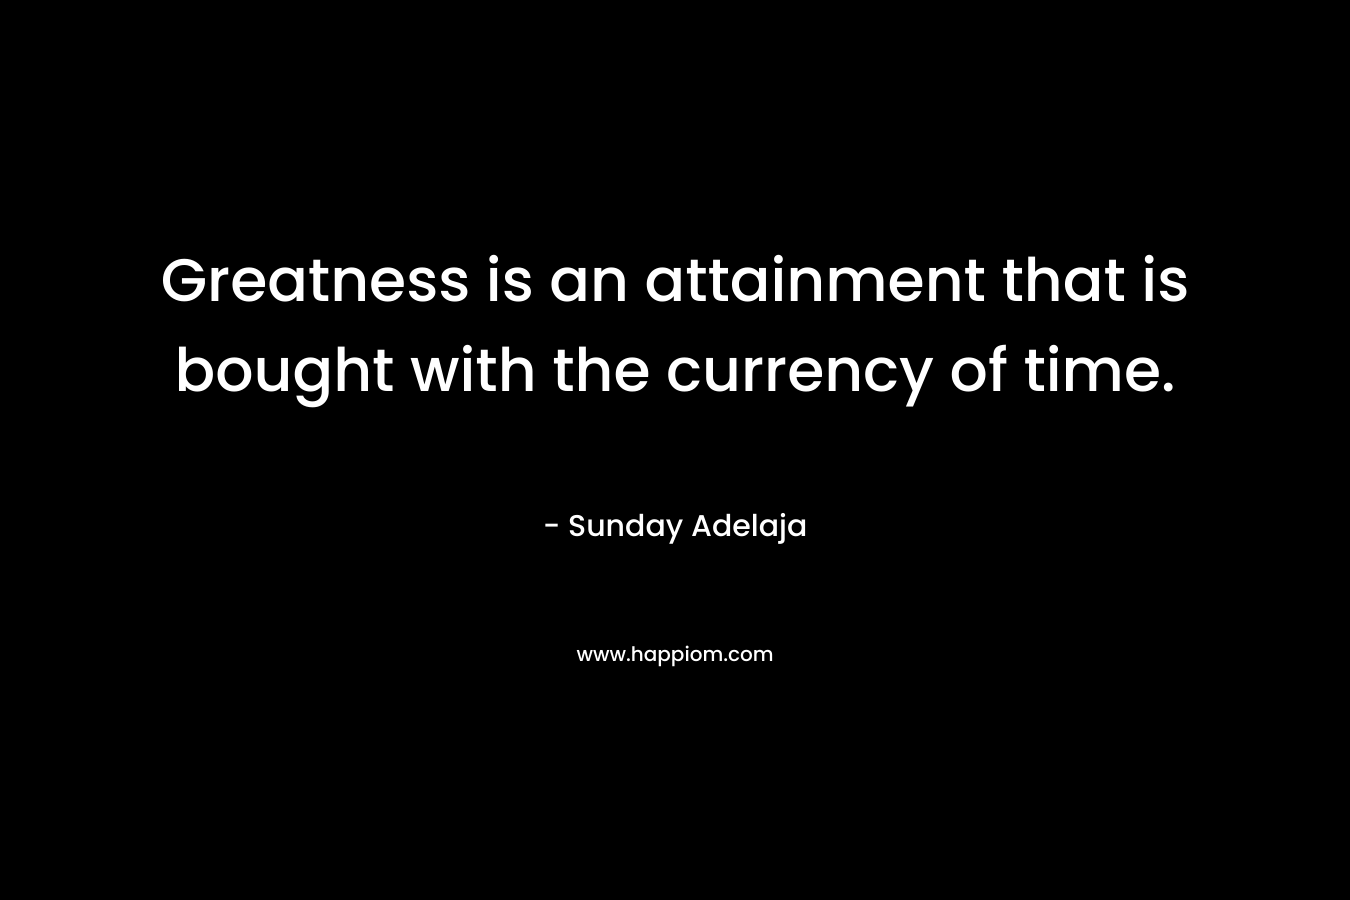 Greatness is an attainment that is bought with the currency of time.